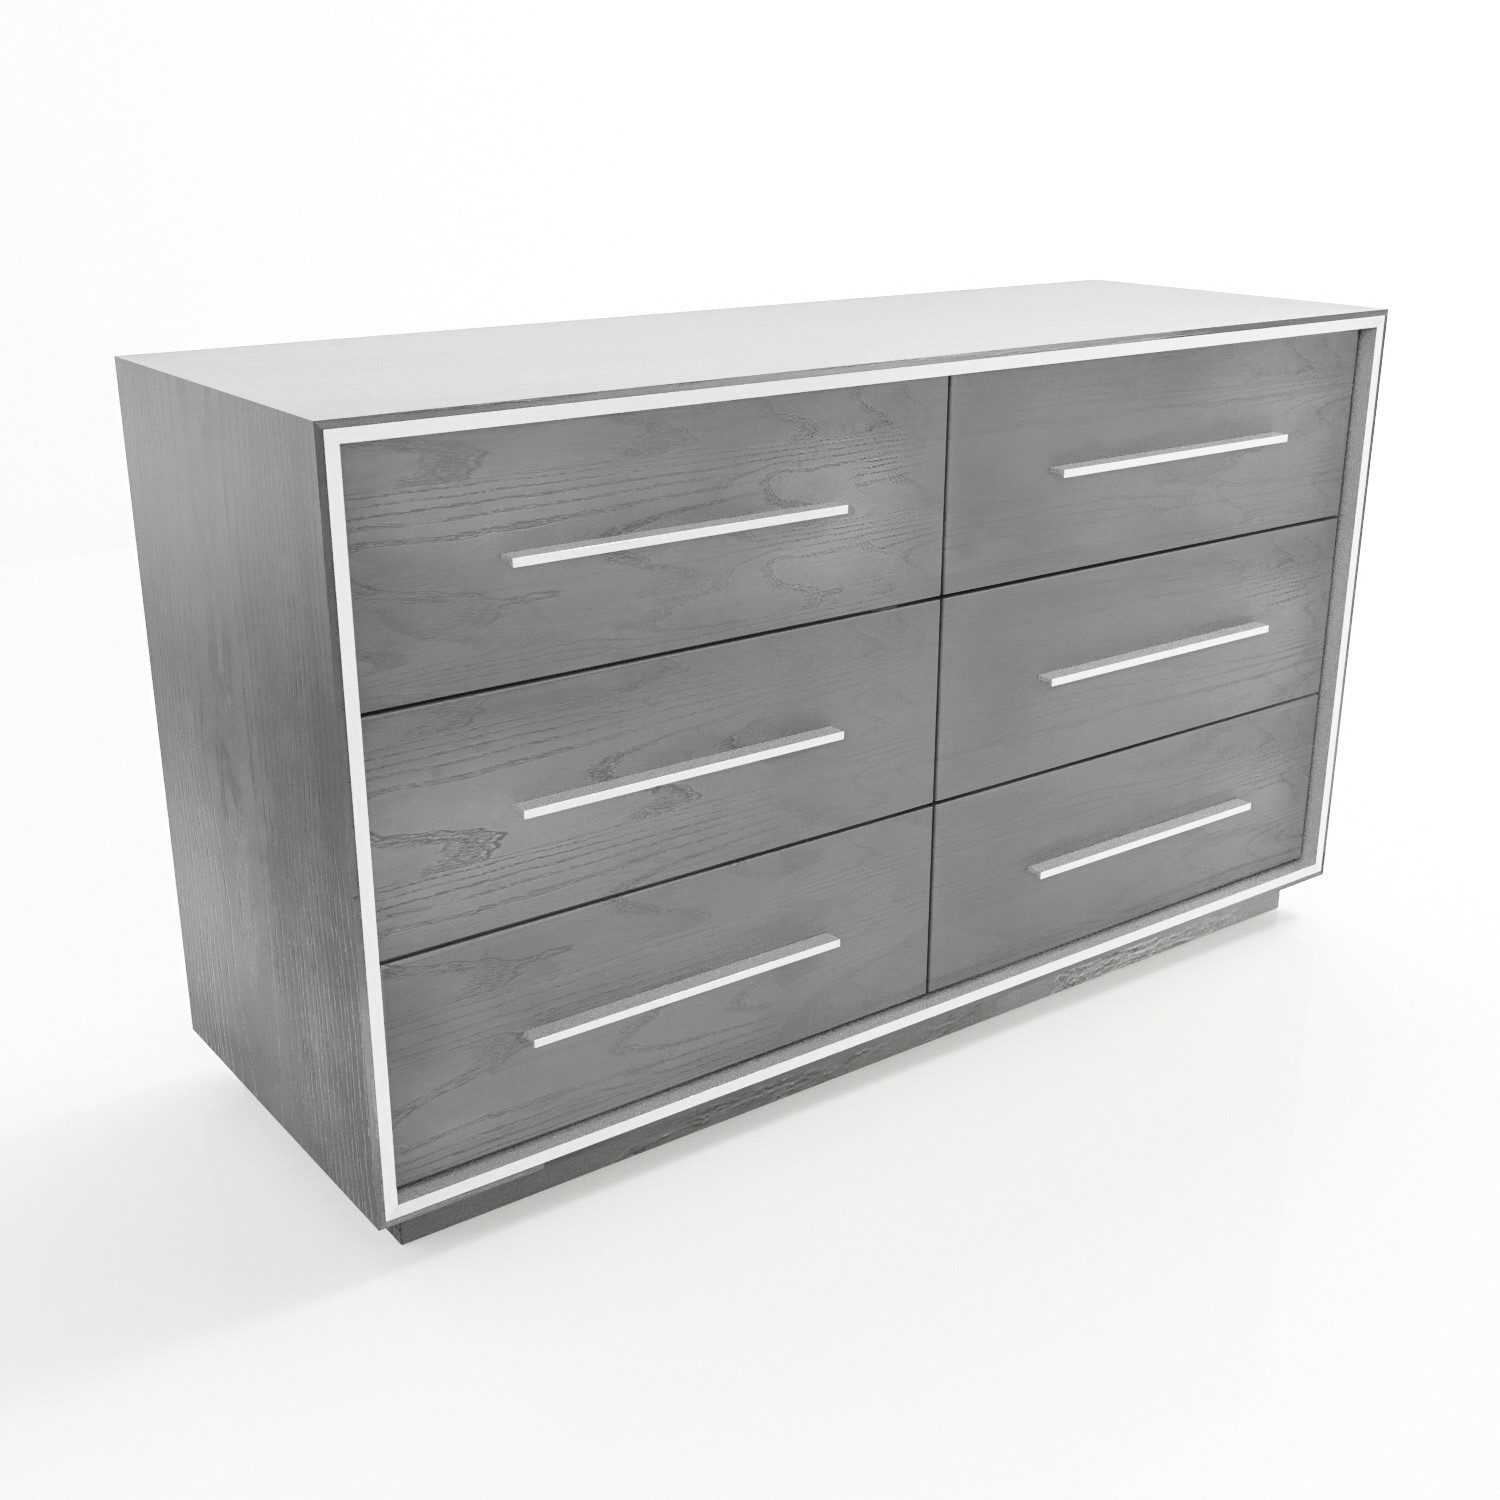 Read more about Wide grey oak rustic chest of 6 drawers franco